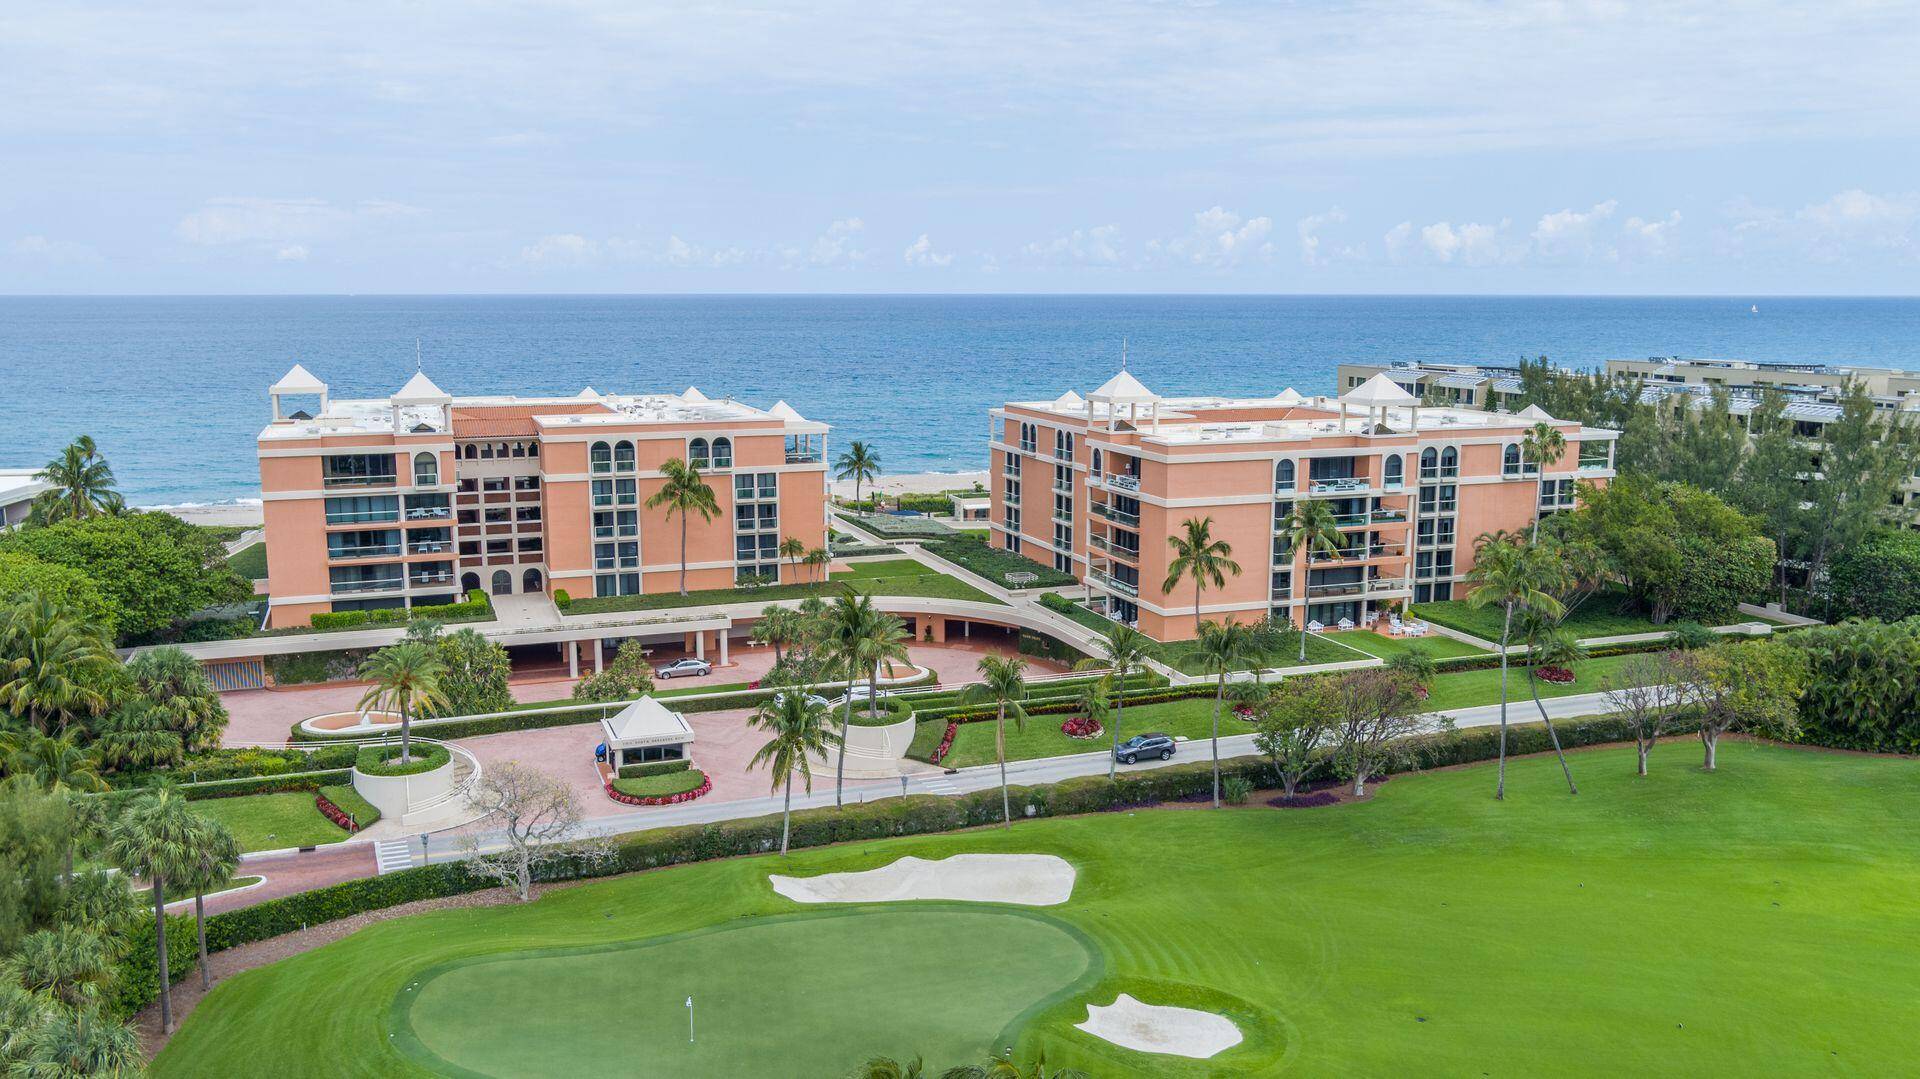 Extraordinary sunset views over expansive lawn and palm tree filled Breakers golf course.